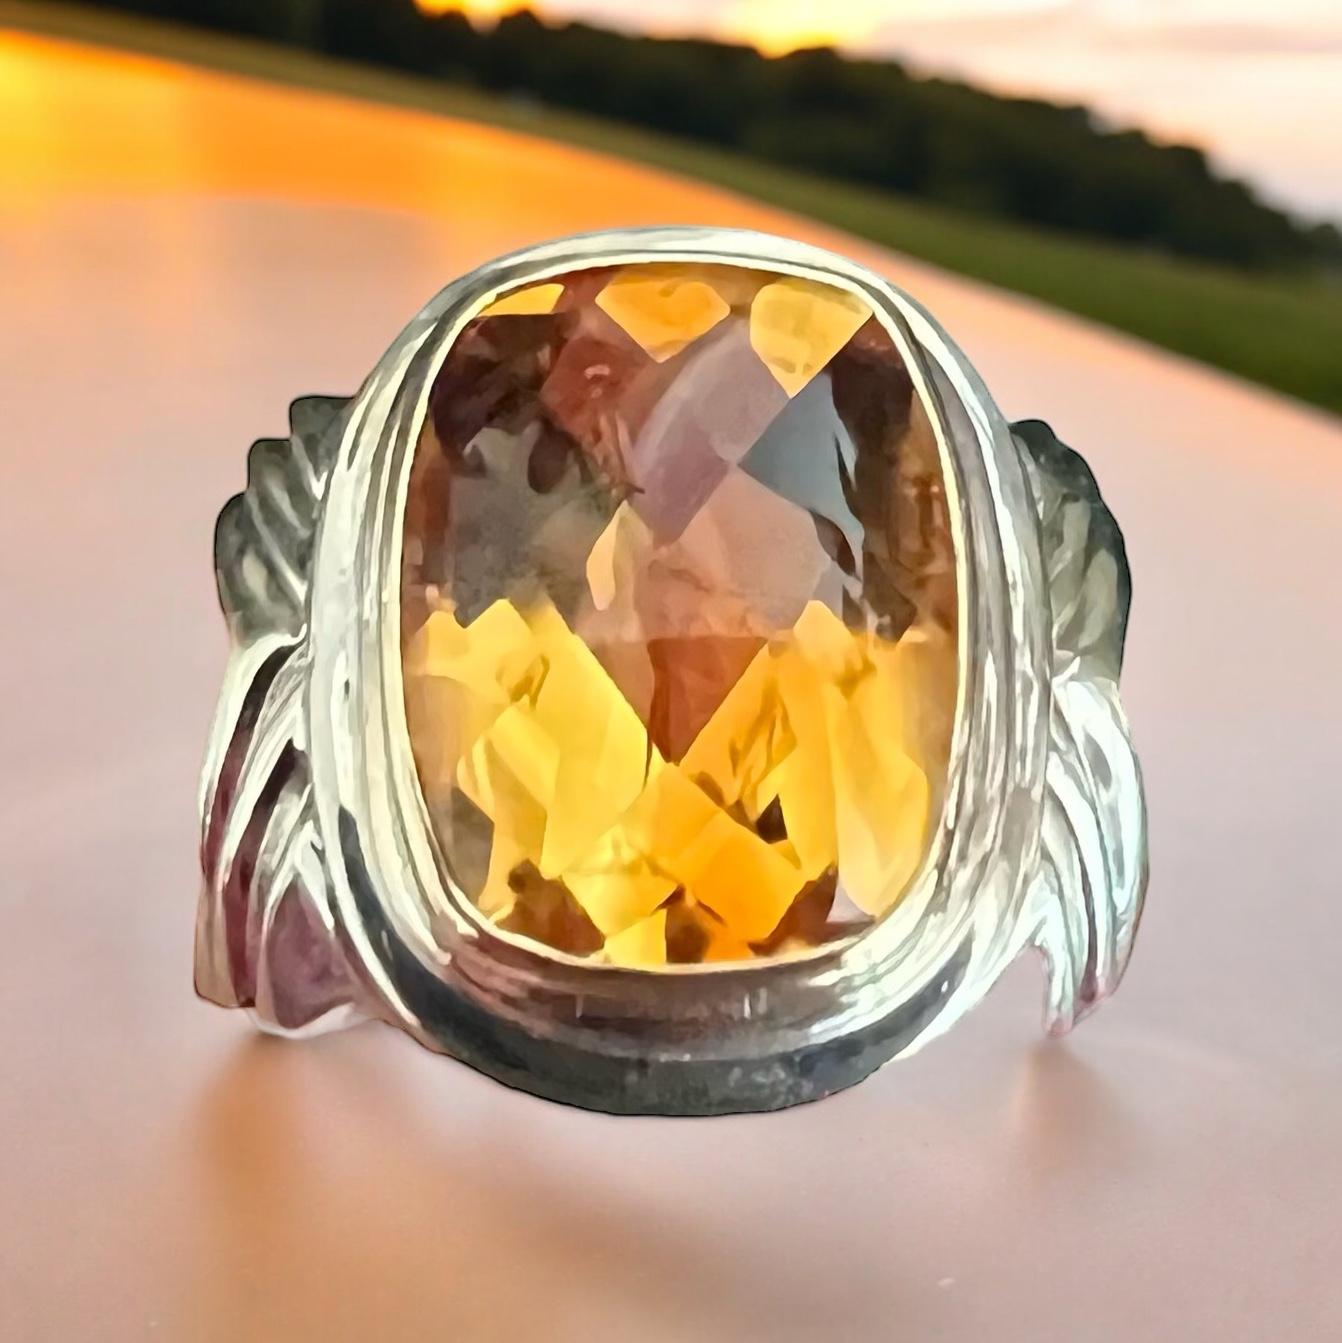 Rigoberto Citrine Silver and Gold ring.

 A buff top Citrine is bezel set in this bold silver and gold Rigoberto ring.  It is a classic that makes a statement.

SPECIFICATIONS:

CITRINE:  A buff top cushion cut Citrine weighing approximately 9